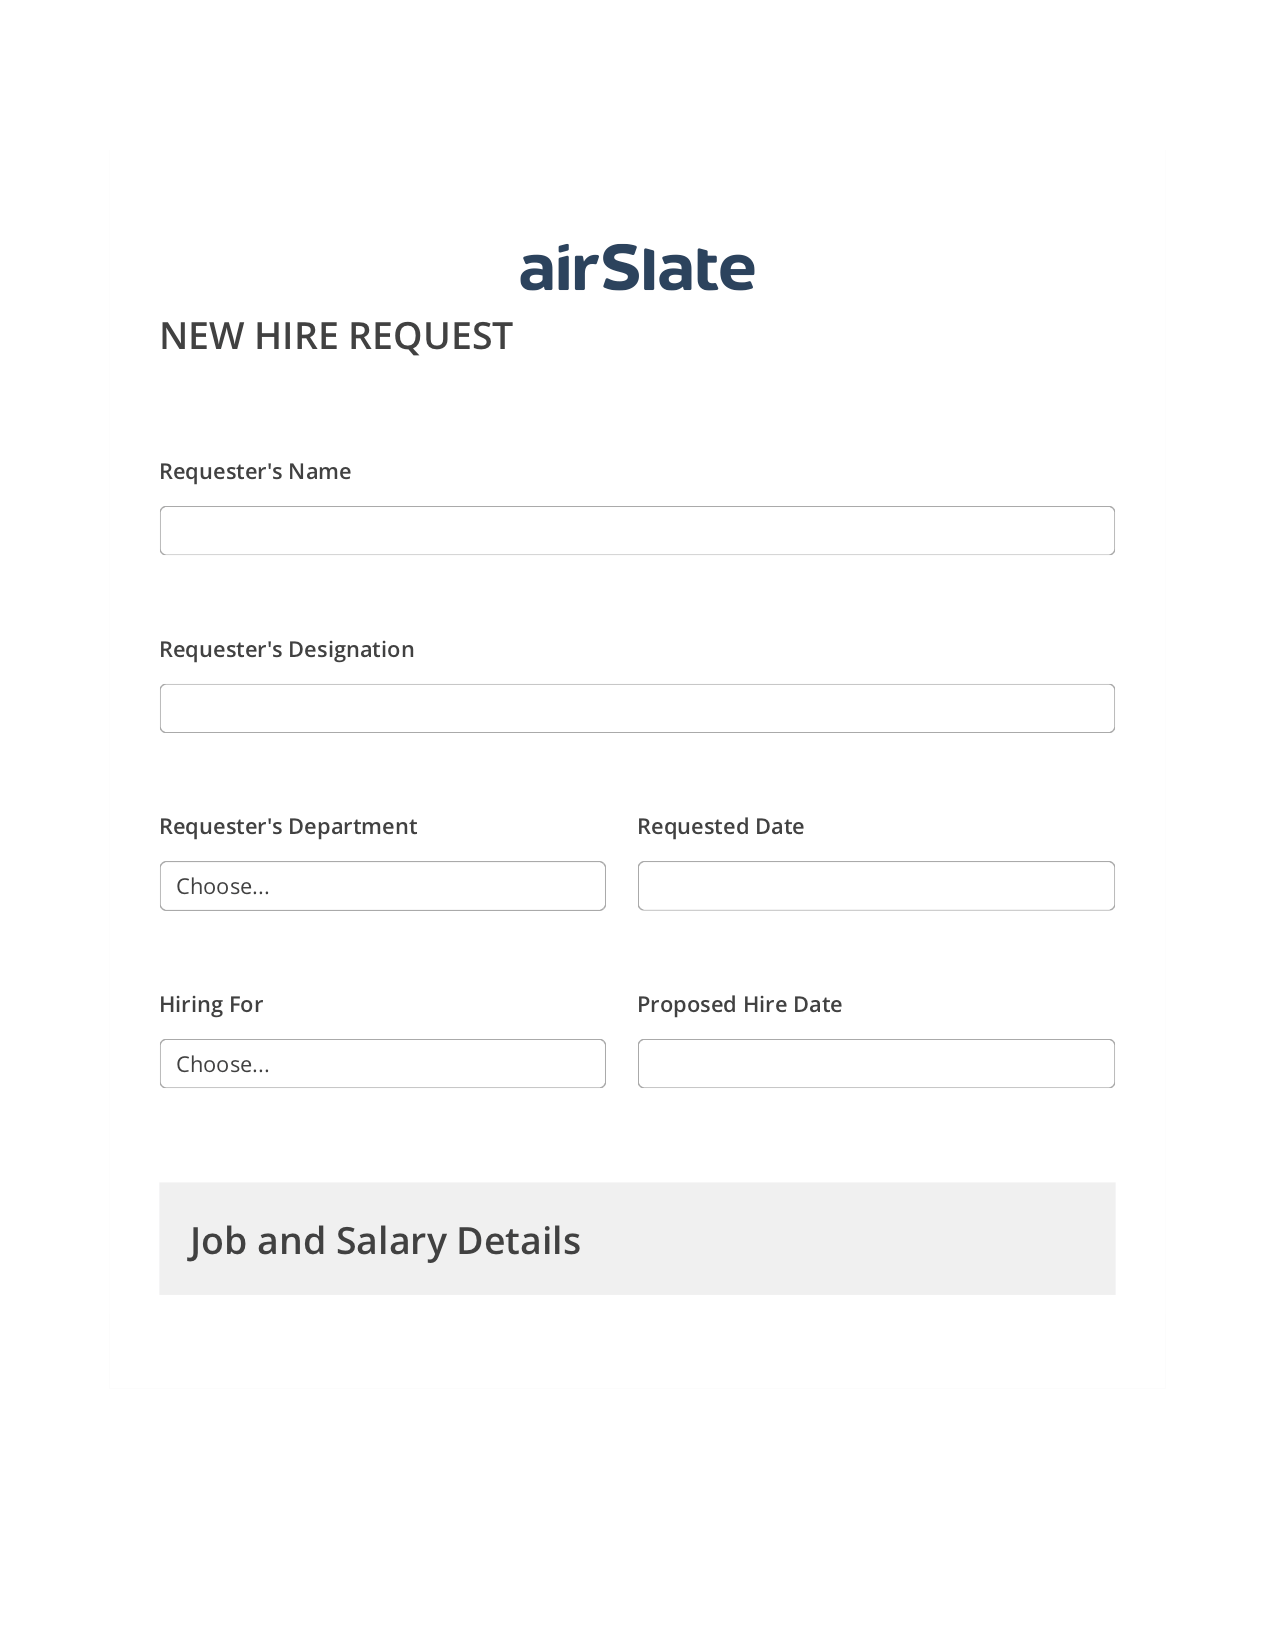 Multirole Hiring Request Workflow Pre-fill Dropdowns from Office 365 Excel Bot, Invoke Salesforce Process Bot, Export to Smartsheet